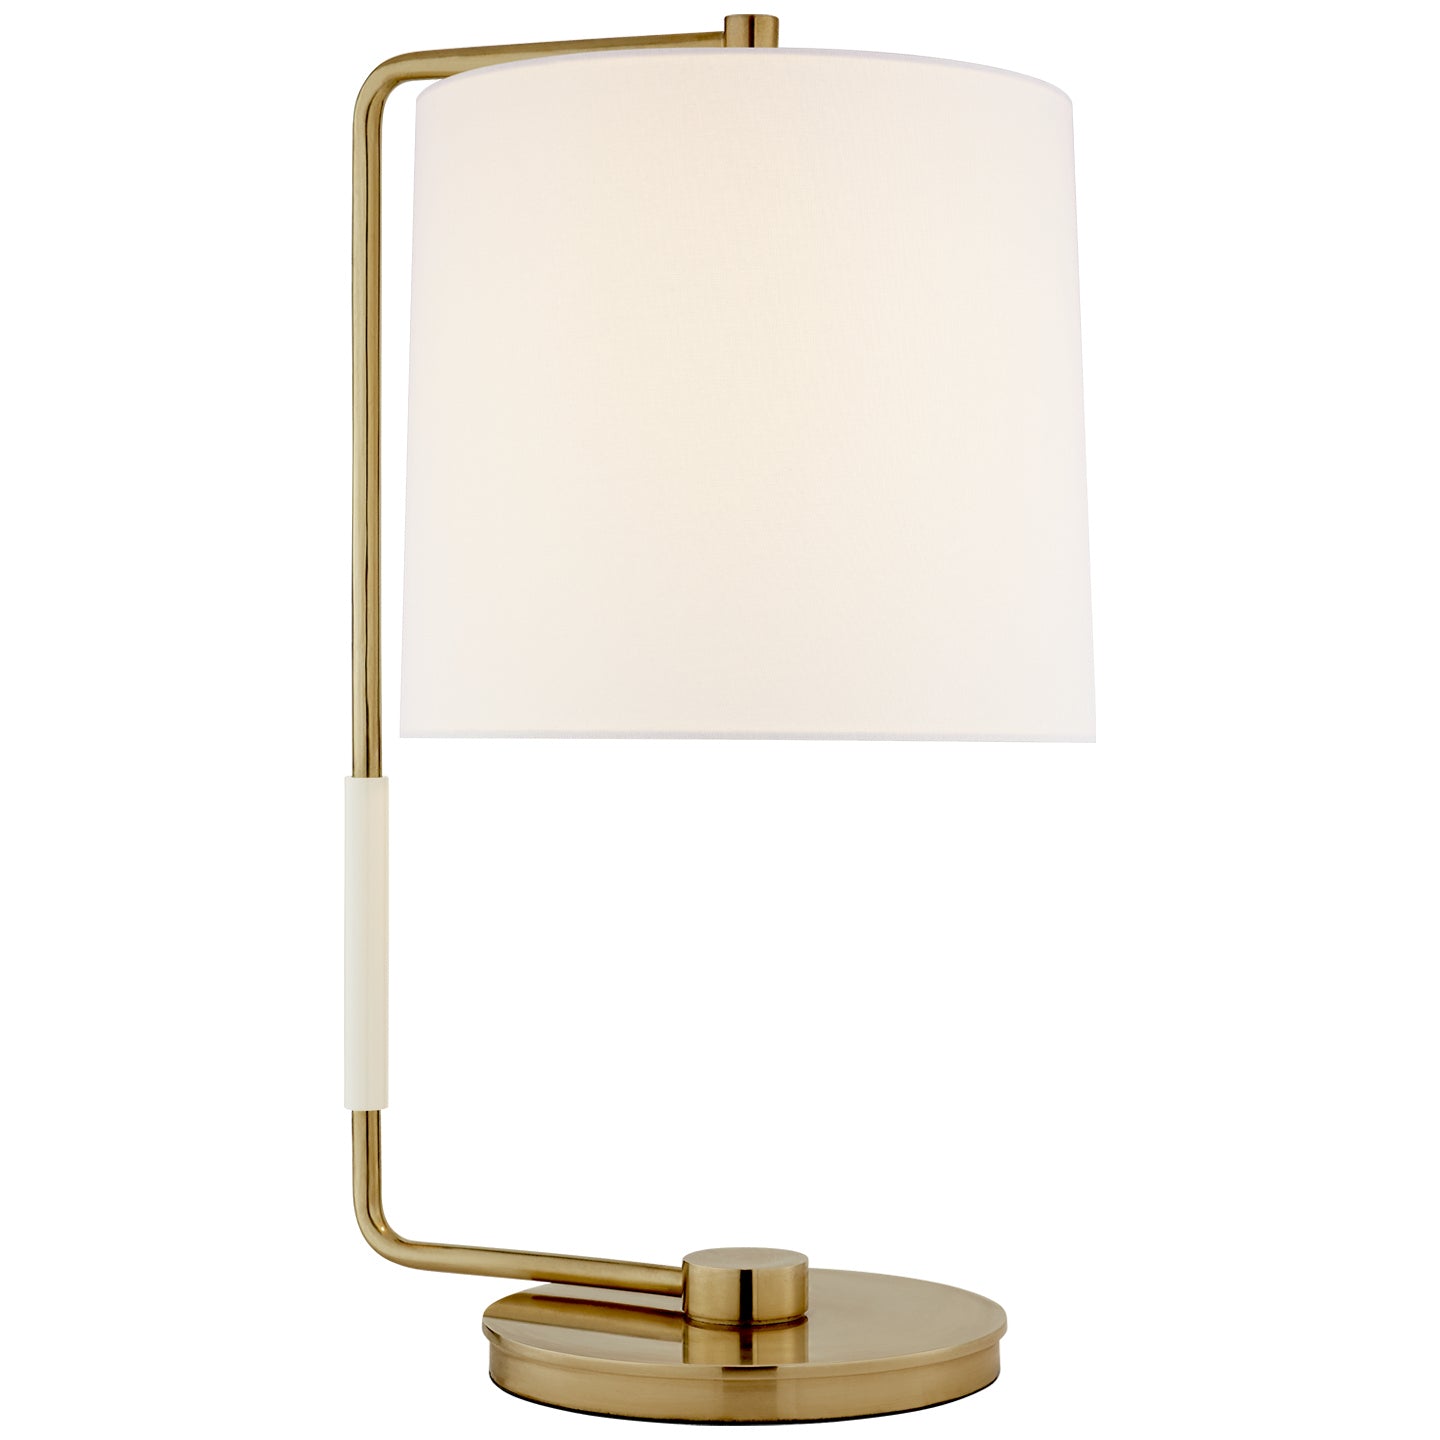 HENLEY  Table lamp Task Lamp in Hand-Rubbed Antique Brass